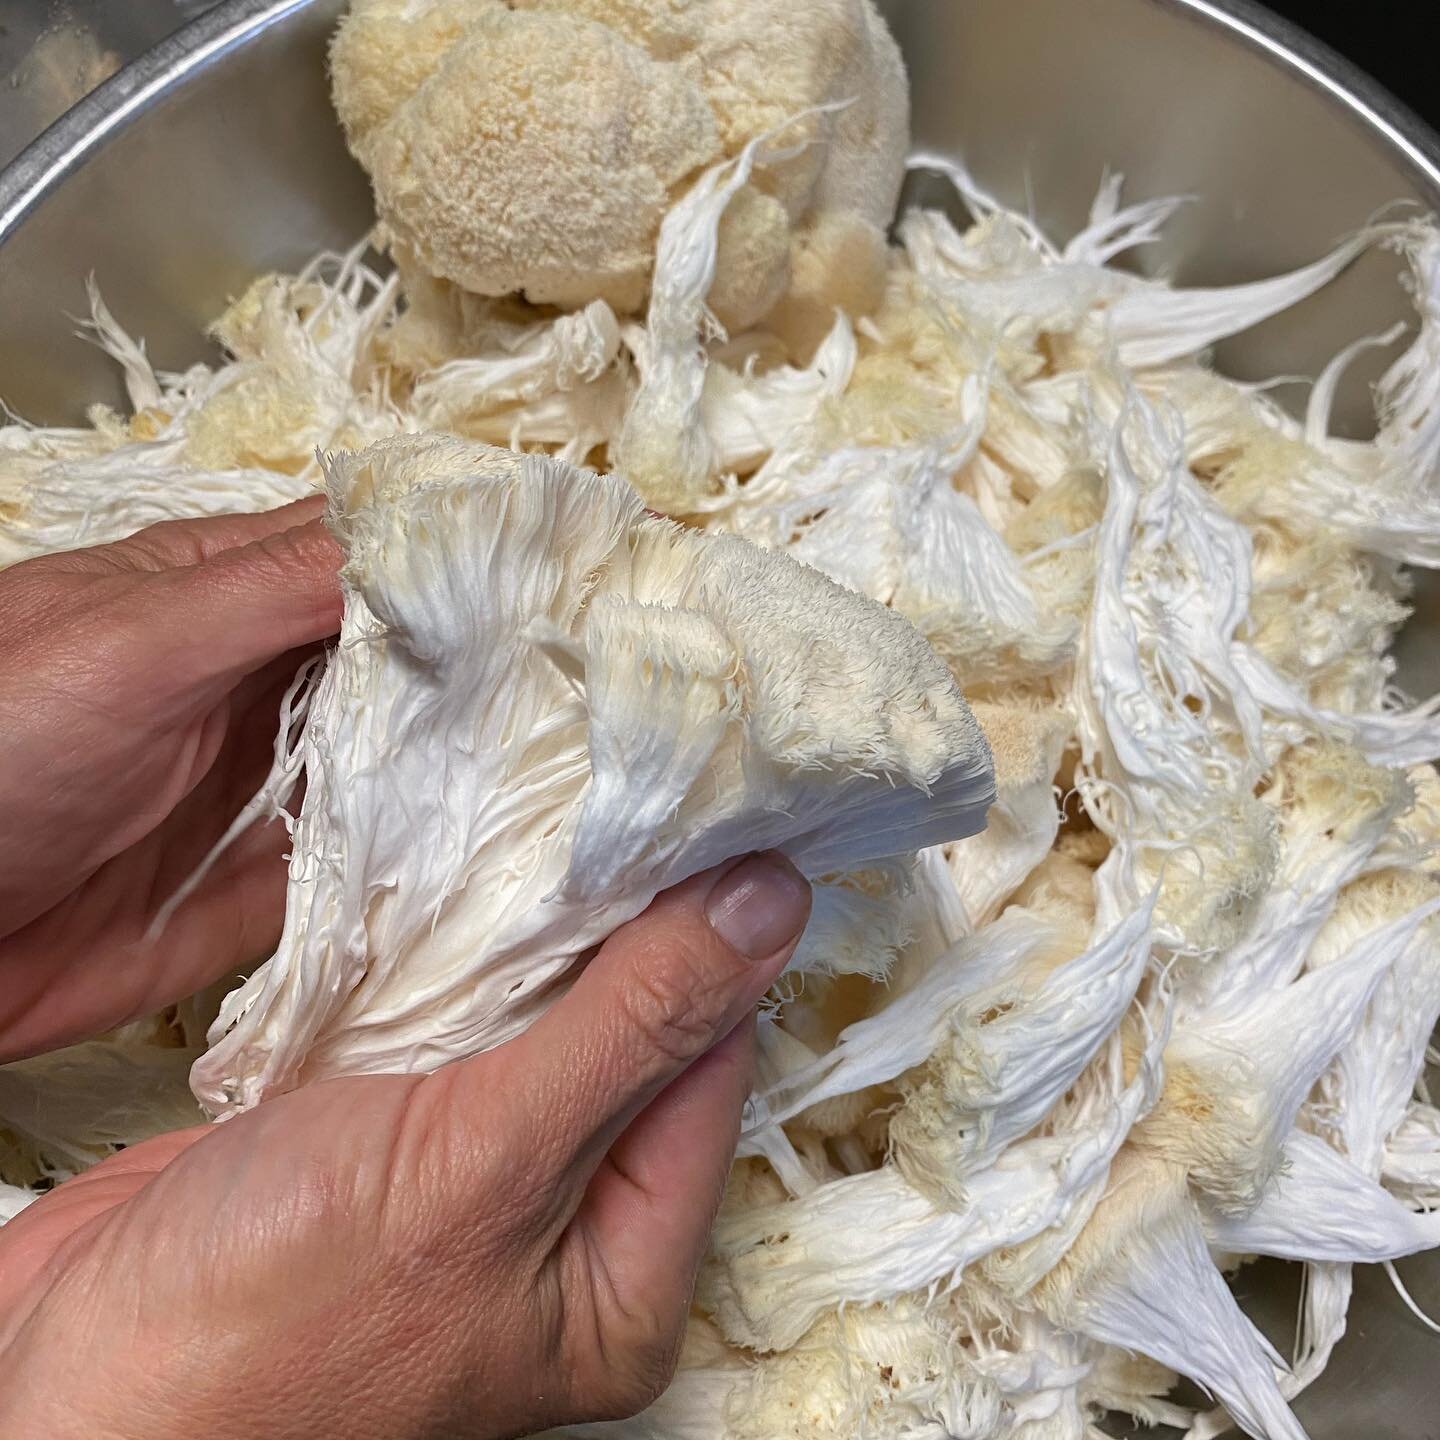 The art of preparing the Lions Mane mushrooms to be eaten &amp; enjoyed 😋 Rosetta was in the house today making the magic happen!!! Get your Lions Mane Tempura today!
#fungi #forestfeeding #downtownasheville #ashevillelocal